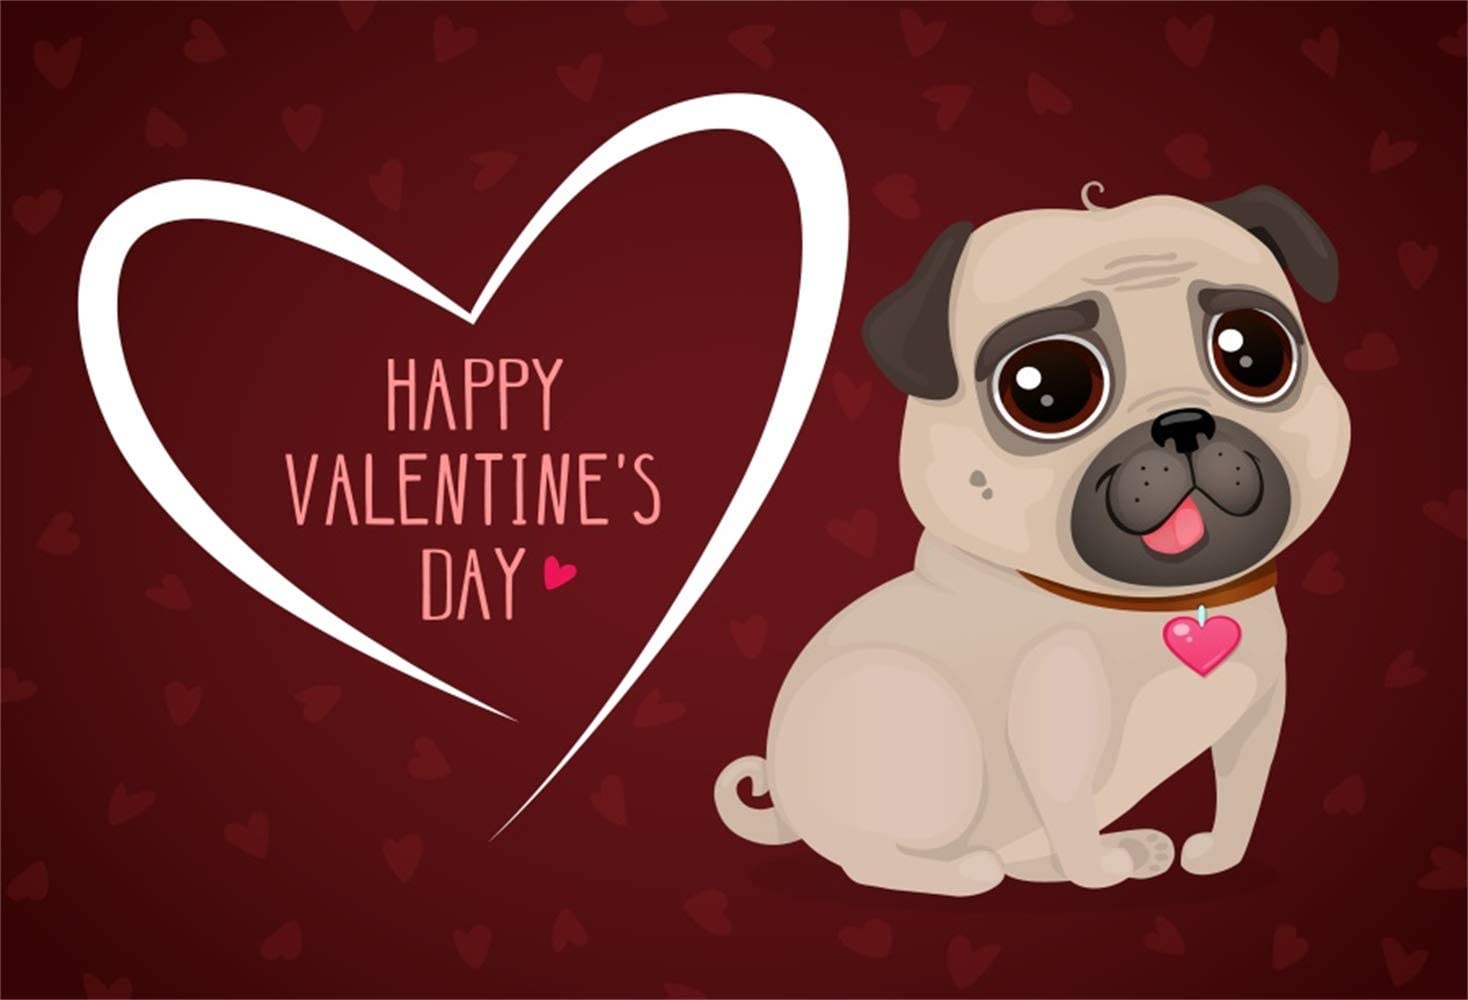 Amazon.com, Laeacco 7x5ft Happy Valentine's Day Backdrop Vinyl Cartoon Cute Puppy with Red Bell Illustration Deep Red Background Lovers Girl Adult Portrait Shoot Greeting Card Wedding Anniversary Wallpaper